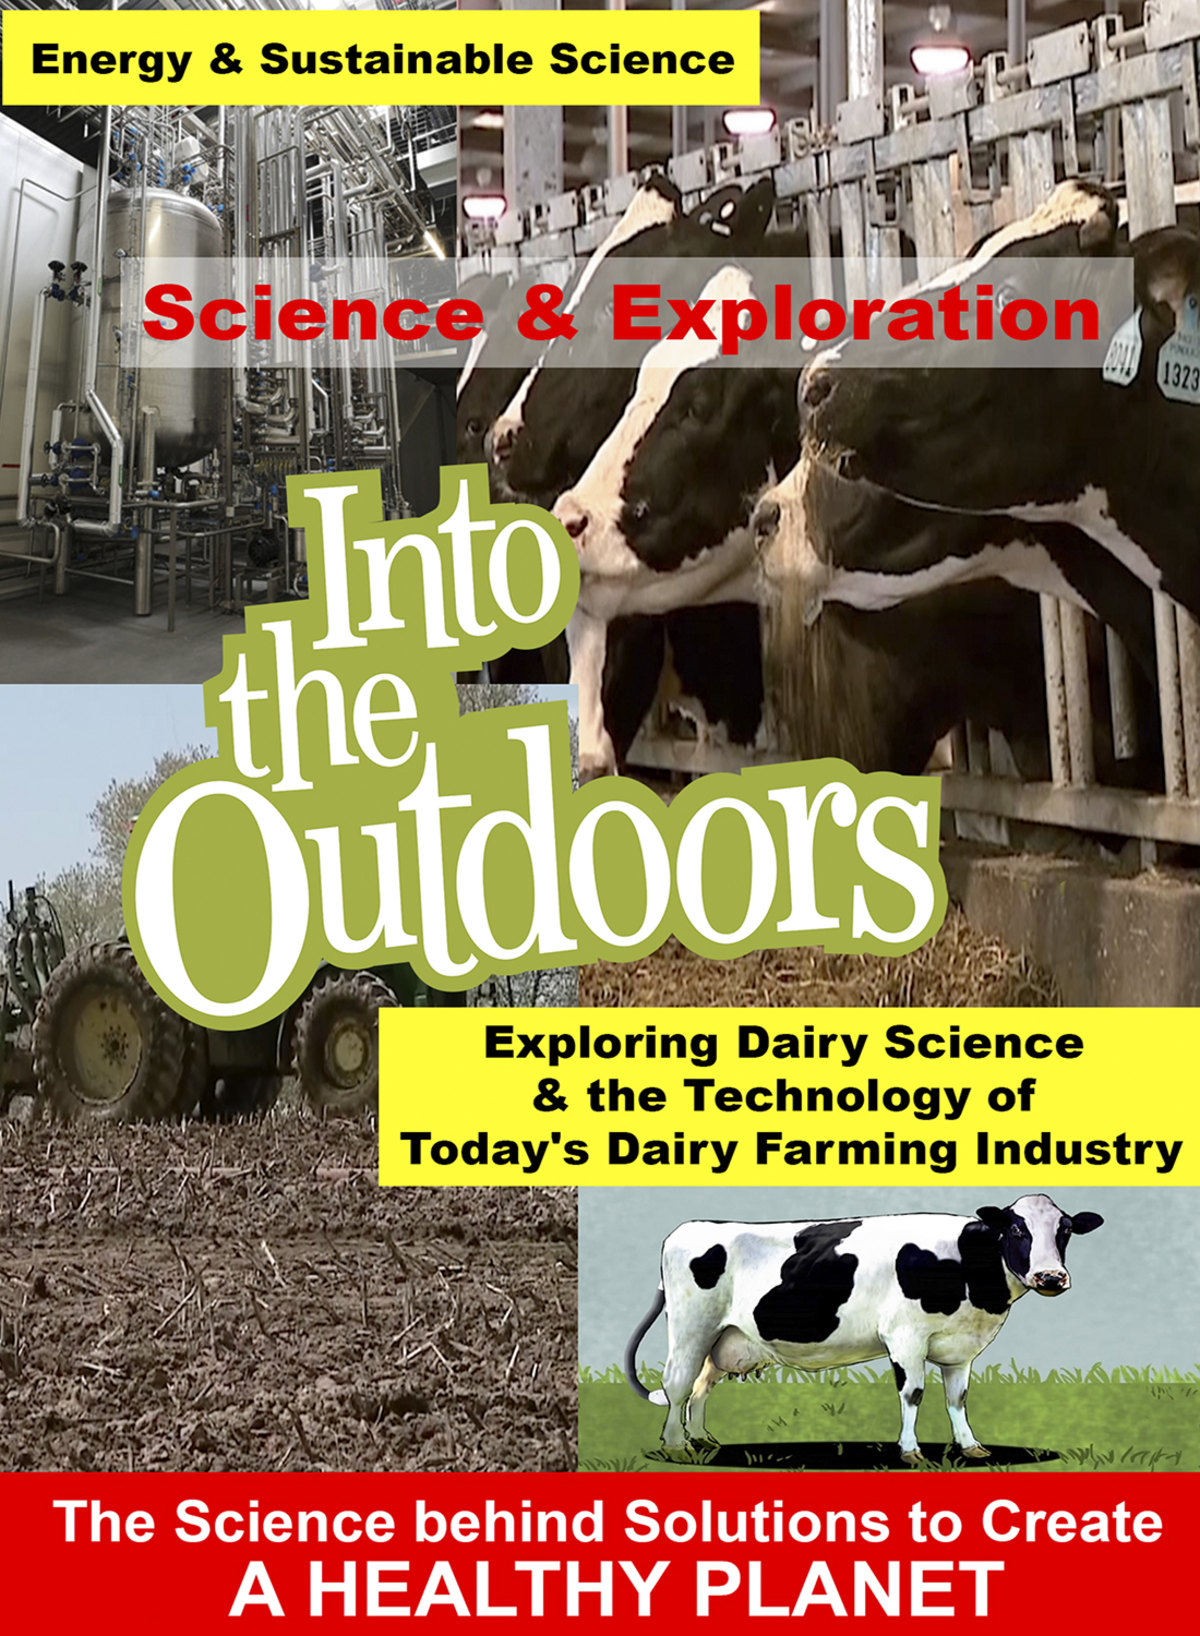 K5000 - Exploring Dairy Science & the Technology of Today's Dairy Farming Industry